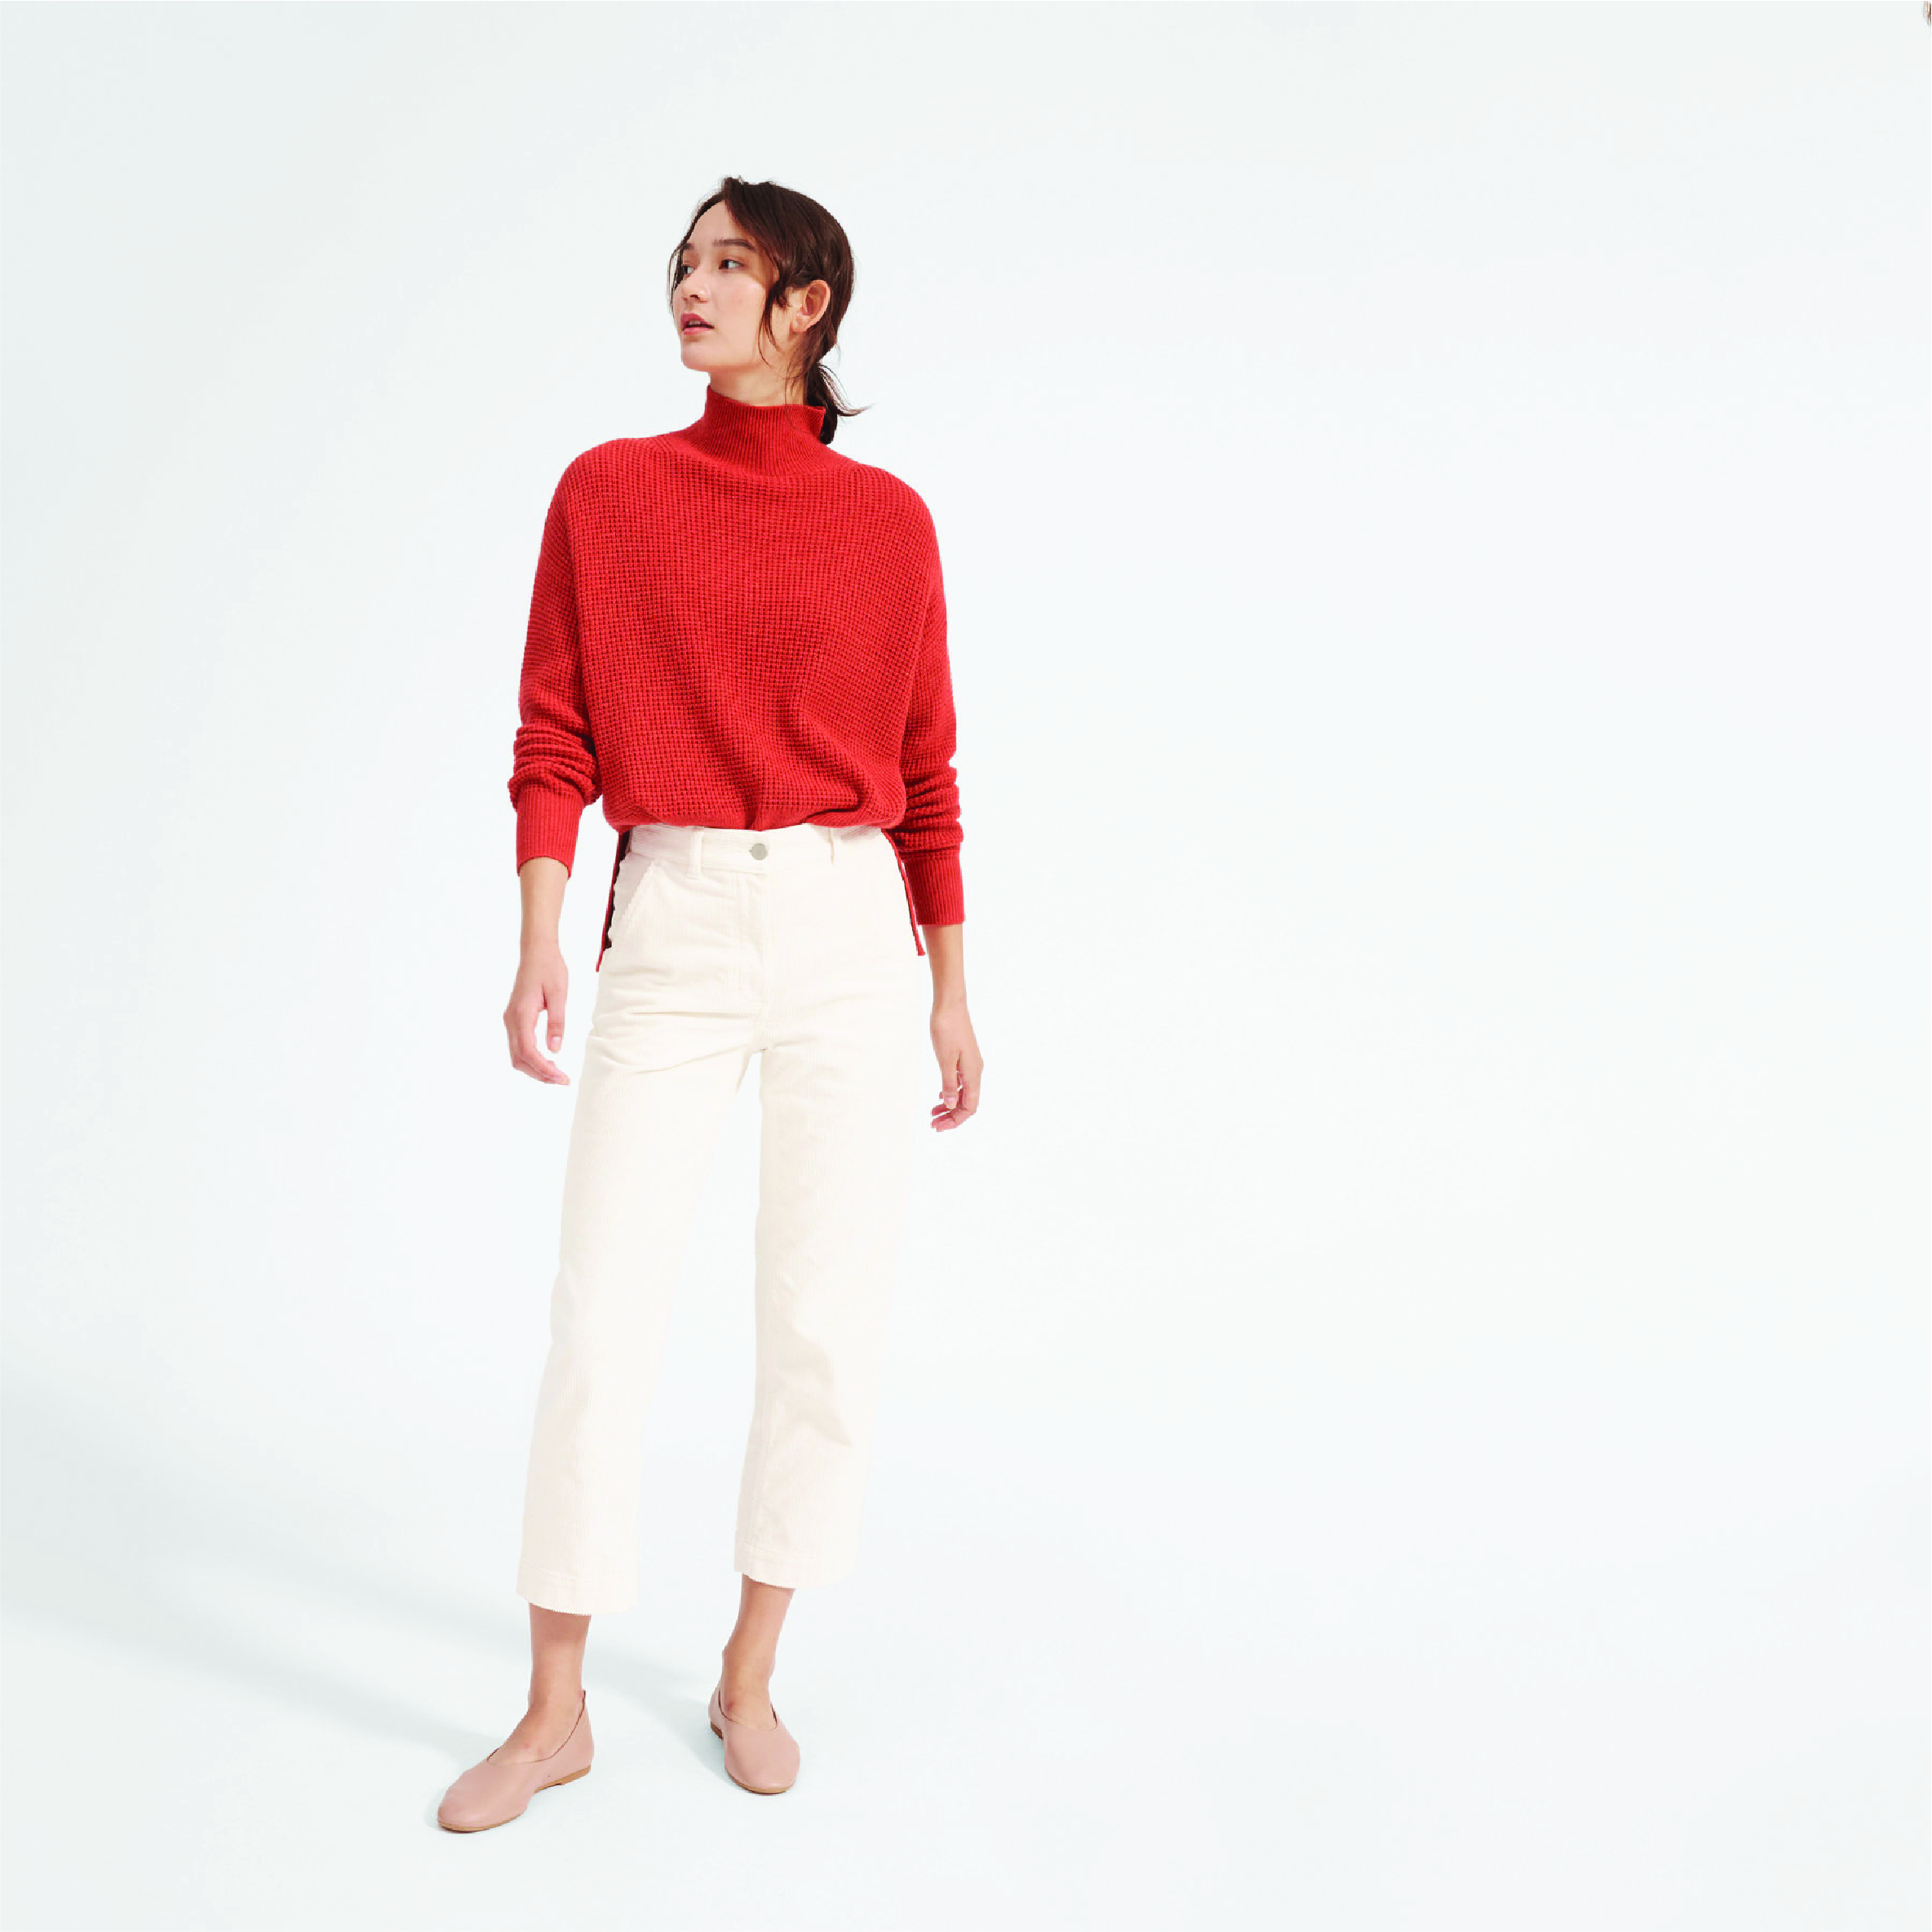 Everlane from San Francisco